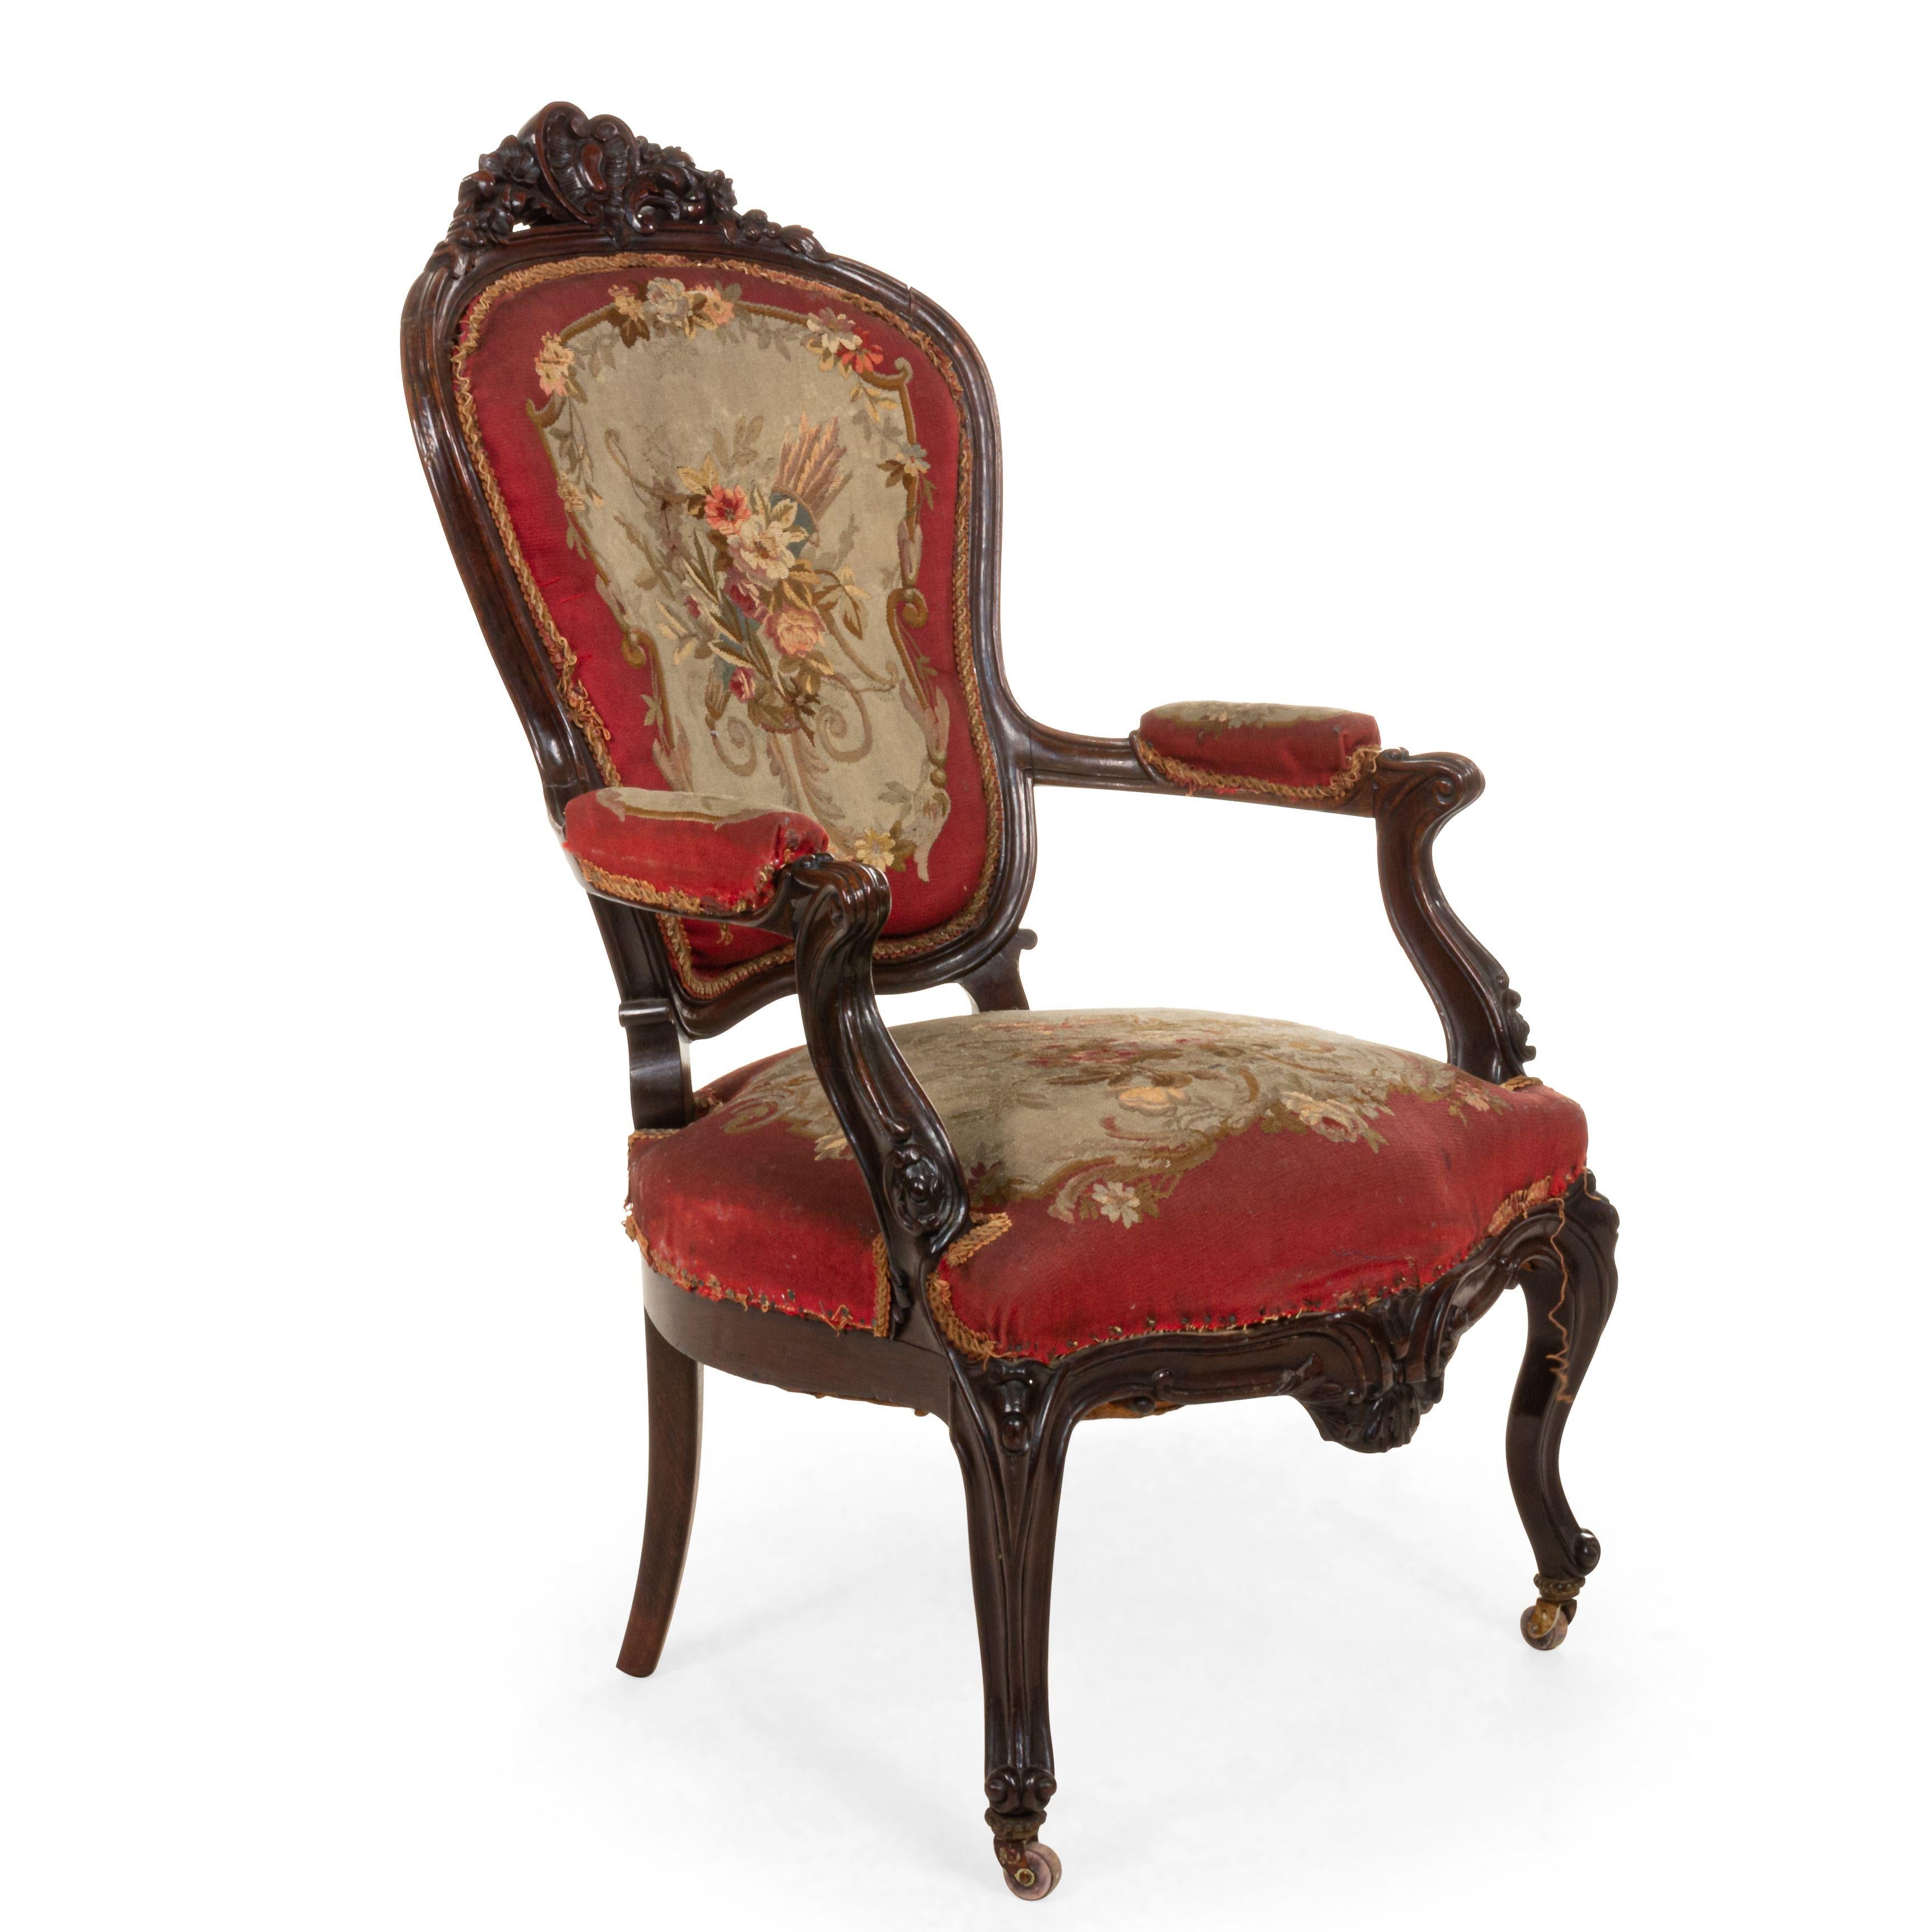 Pair of French Victorian rosewood armchairs with carved back crest rail and red floral Aubusson upholstery. (similar to #038110C).